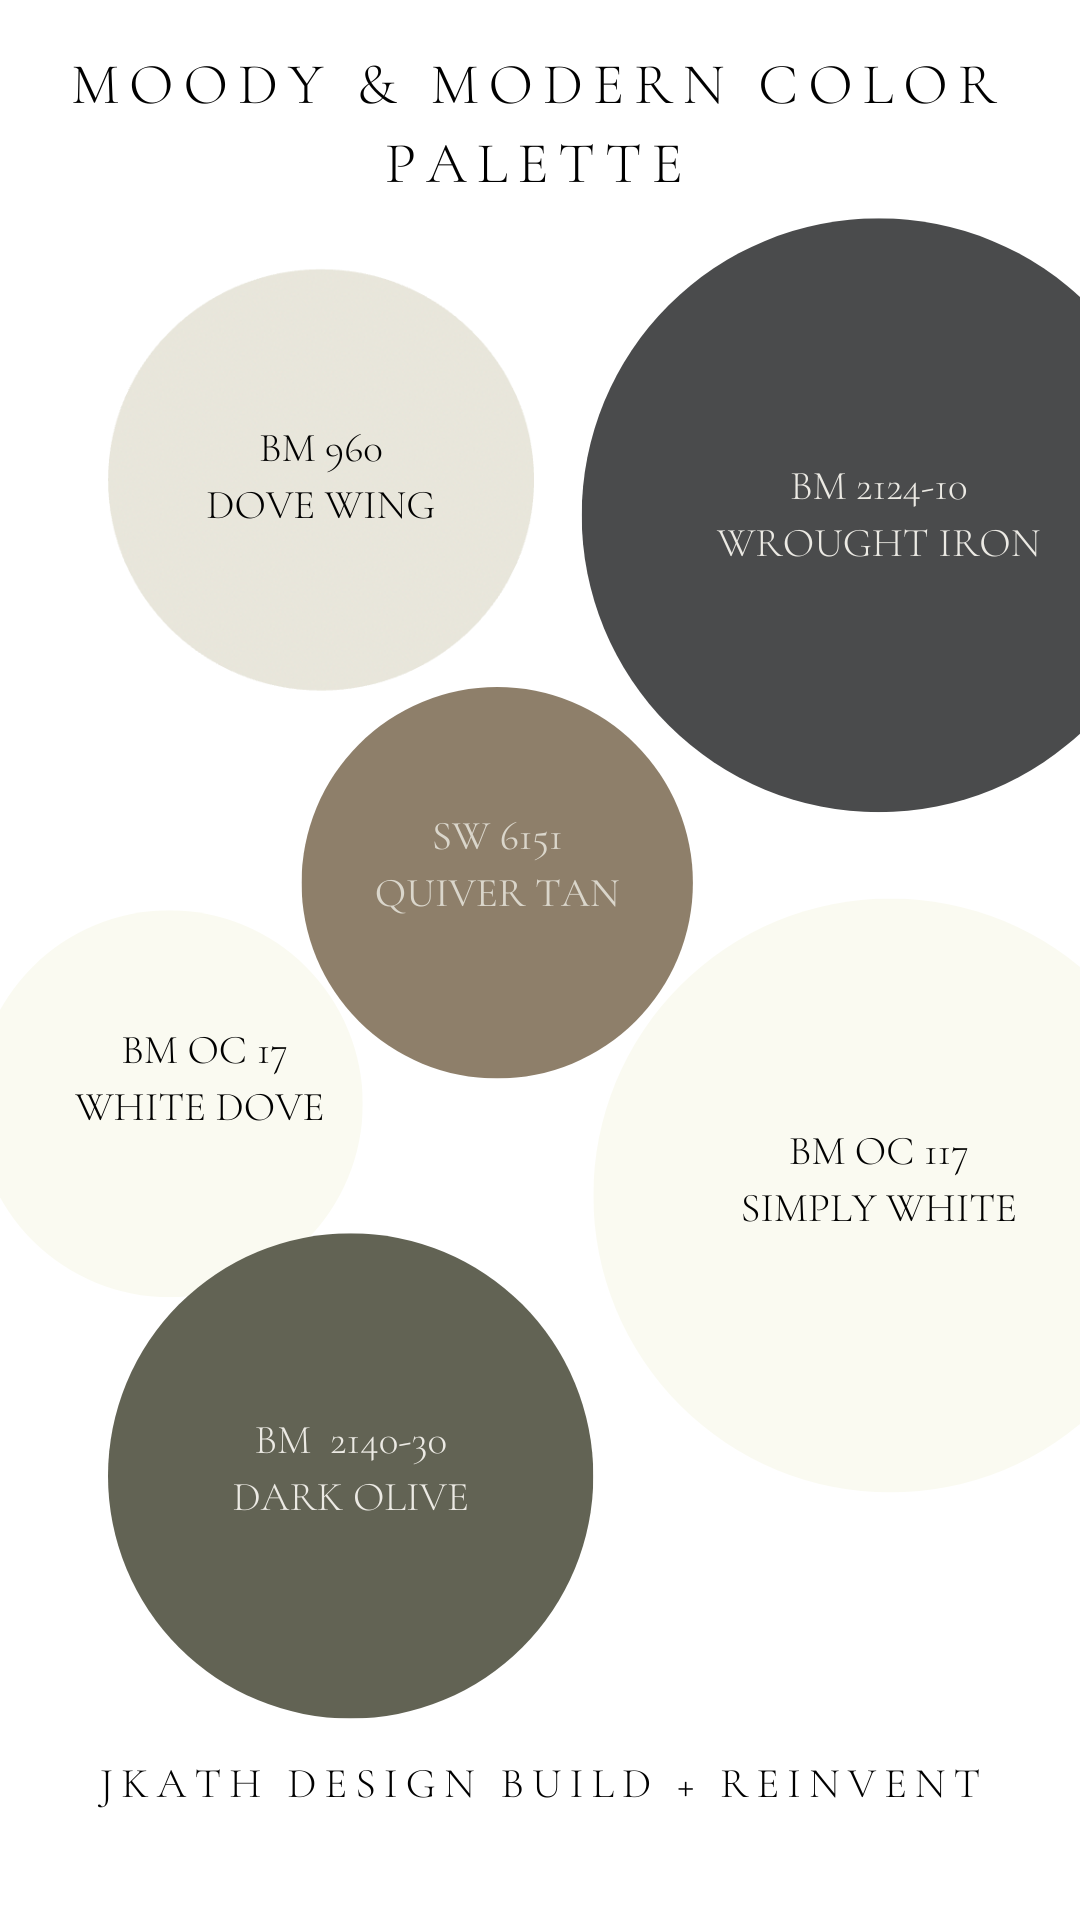 Moody and Modern Paint Colors revealed for our latest whole house renovation.